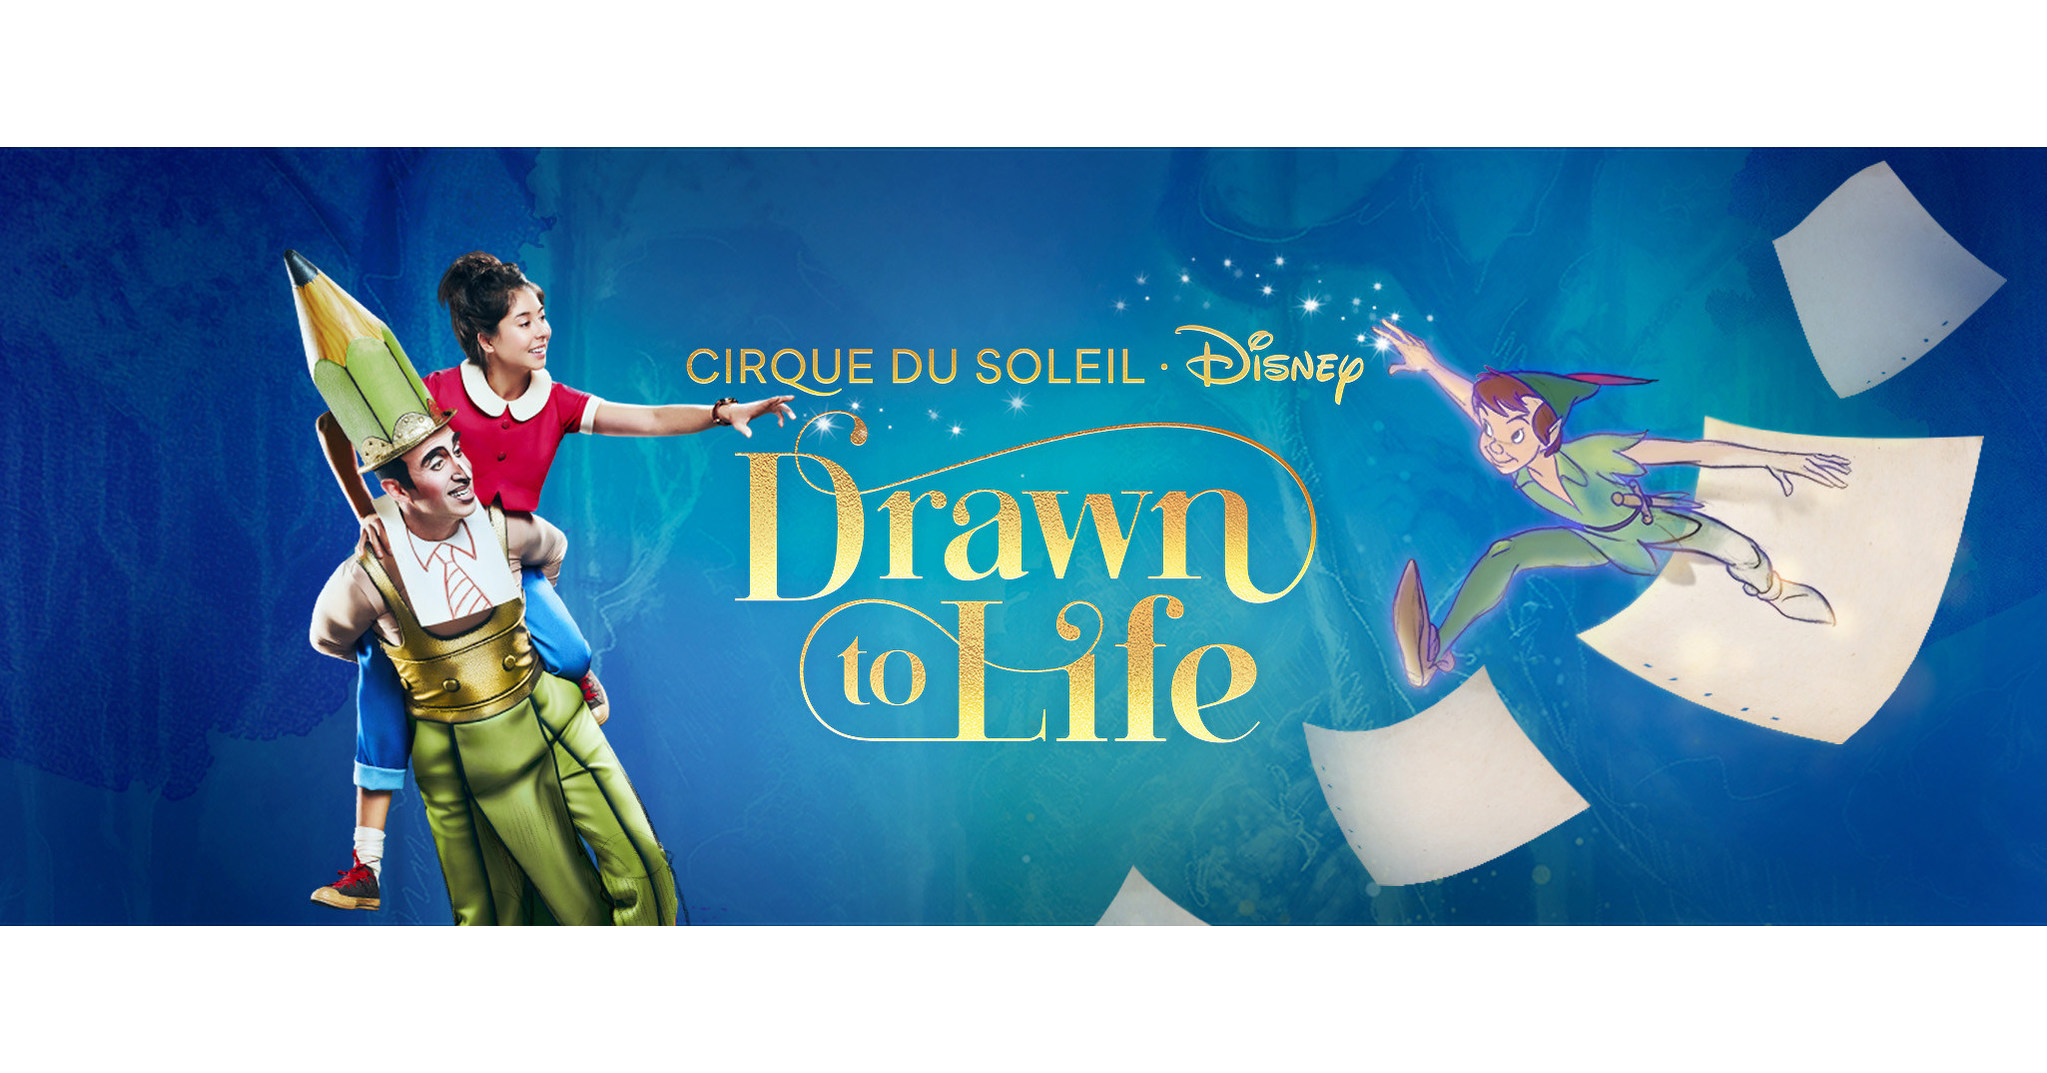 Cirque Du Soleil And Disney Announce Ticket OnSale Date For Drawn To Life